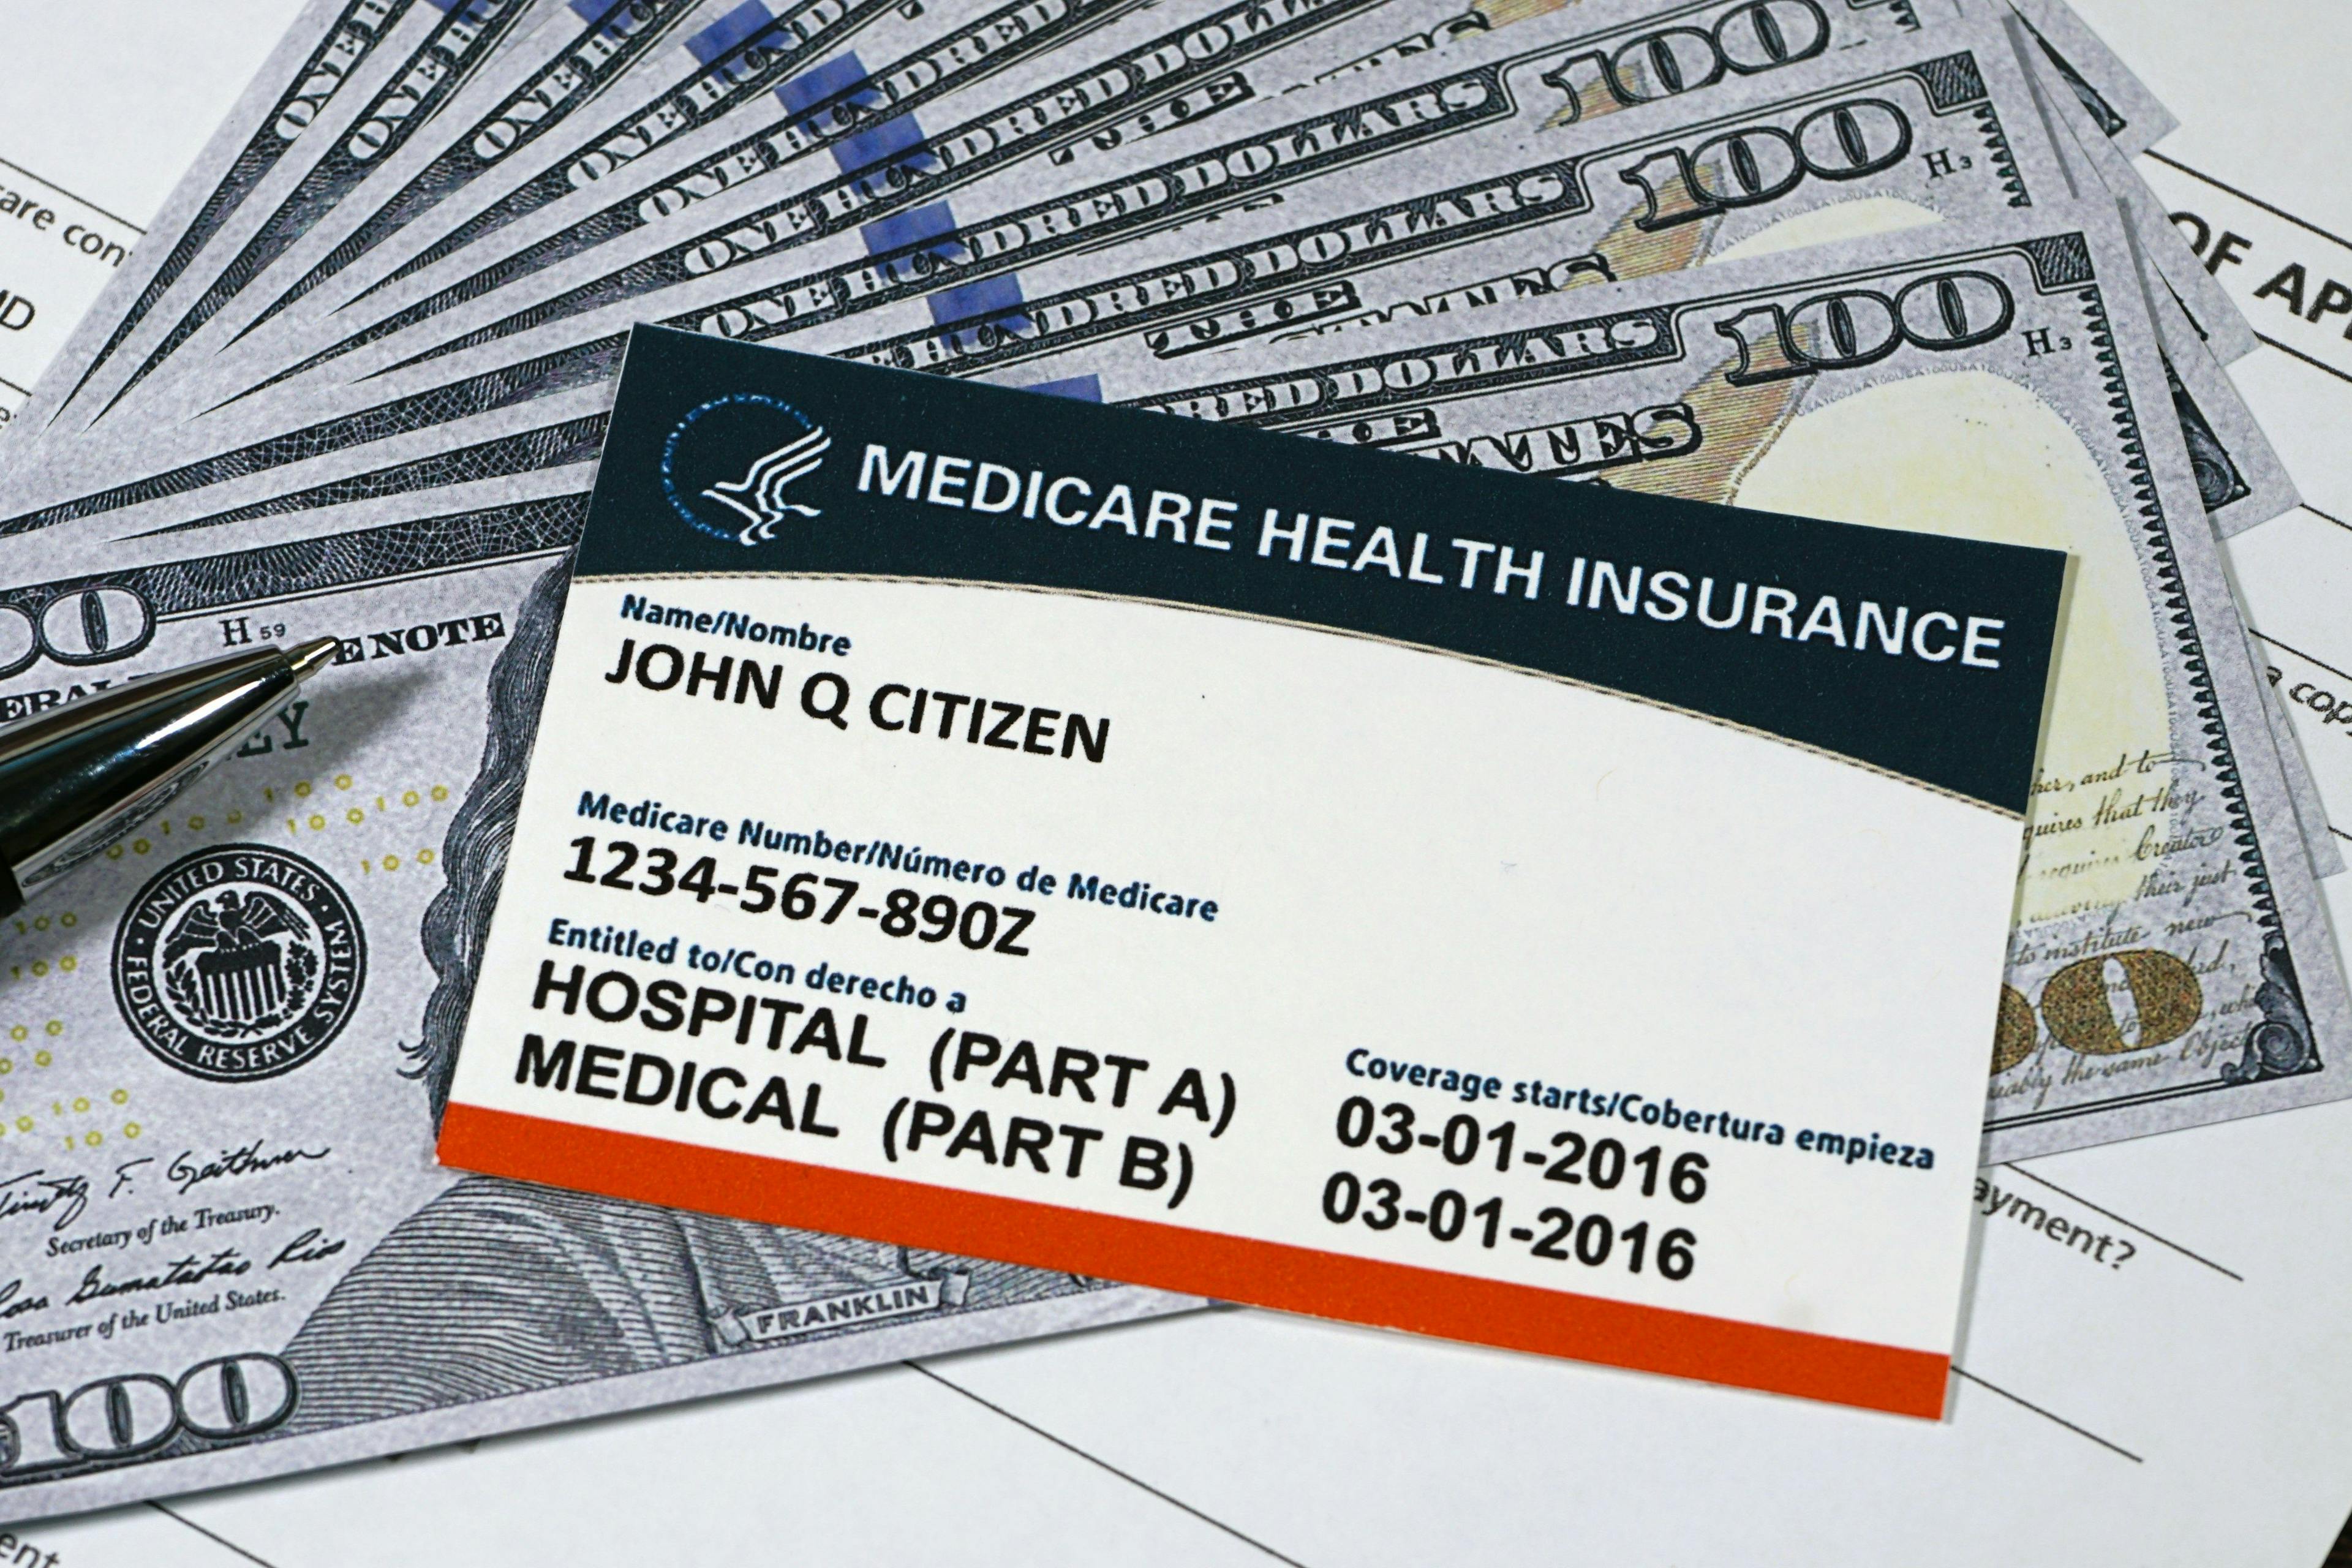 About 1 in 6 of Medicare patients report trouble paying Medicare bills and debt.